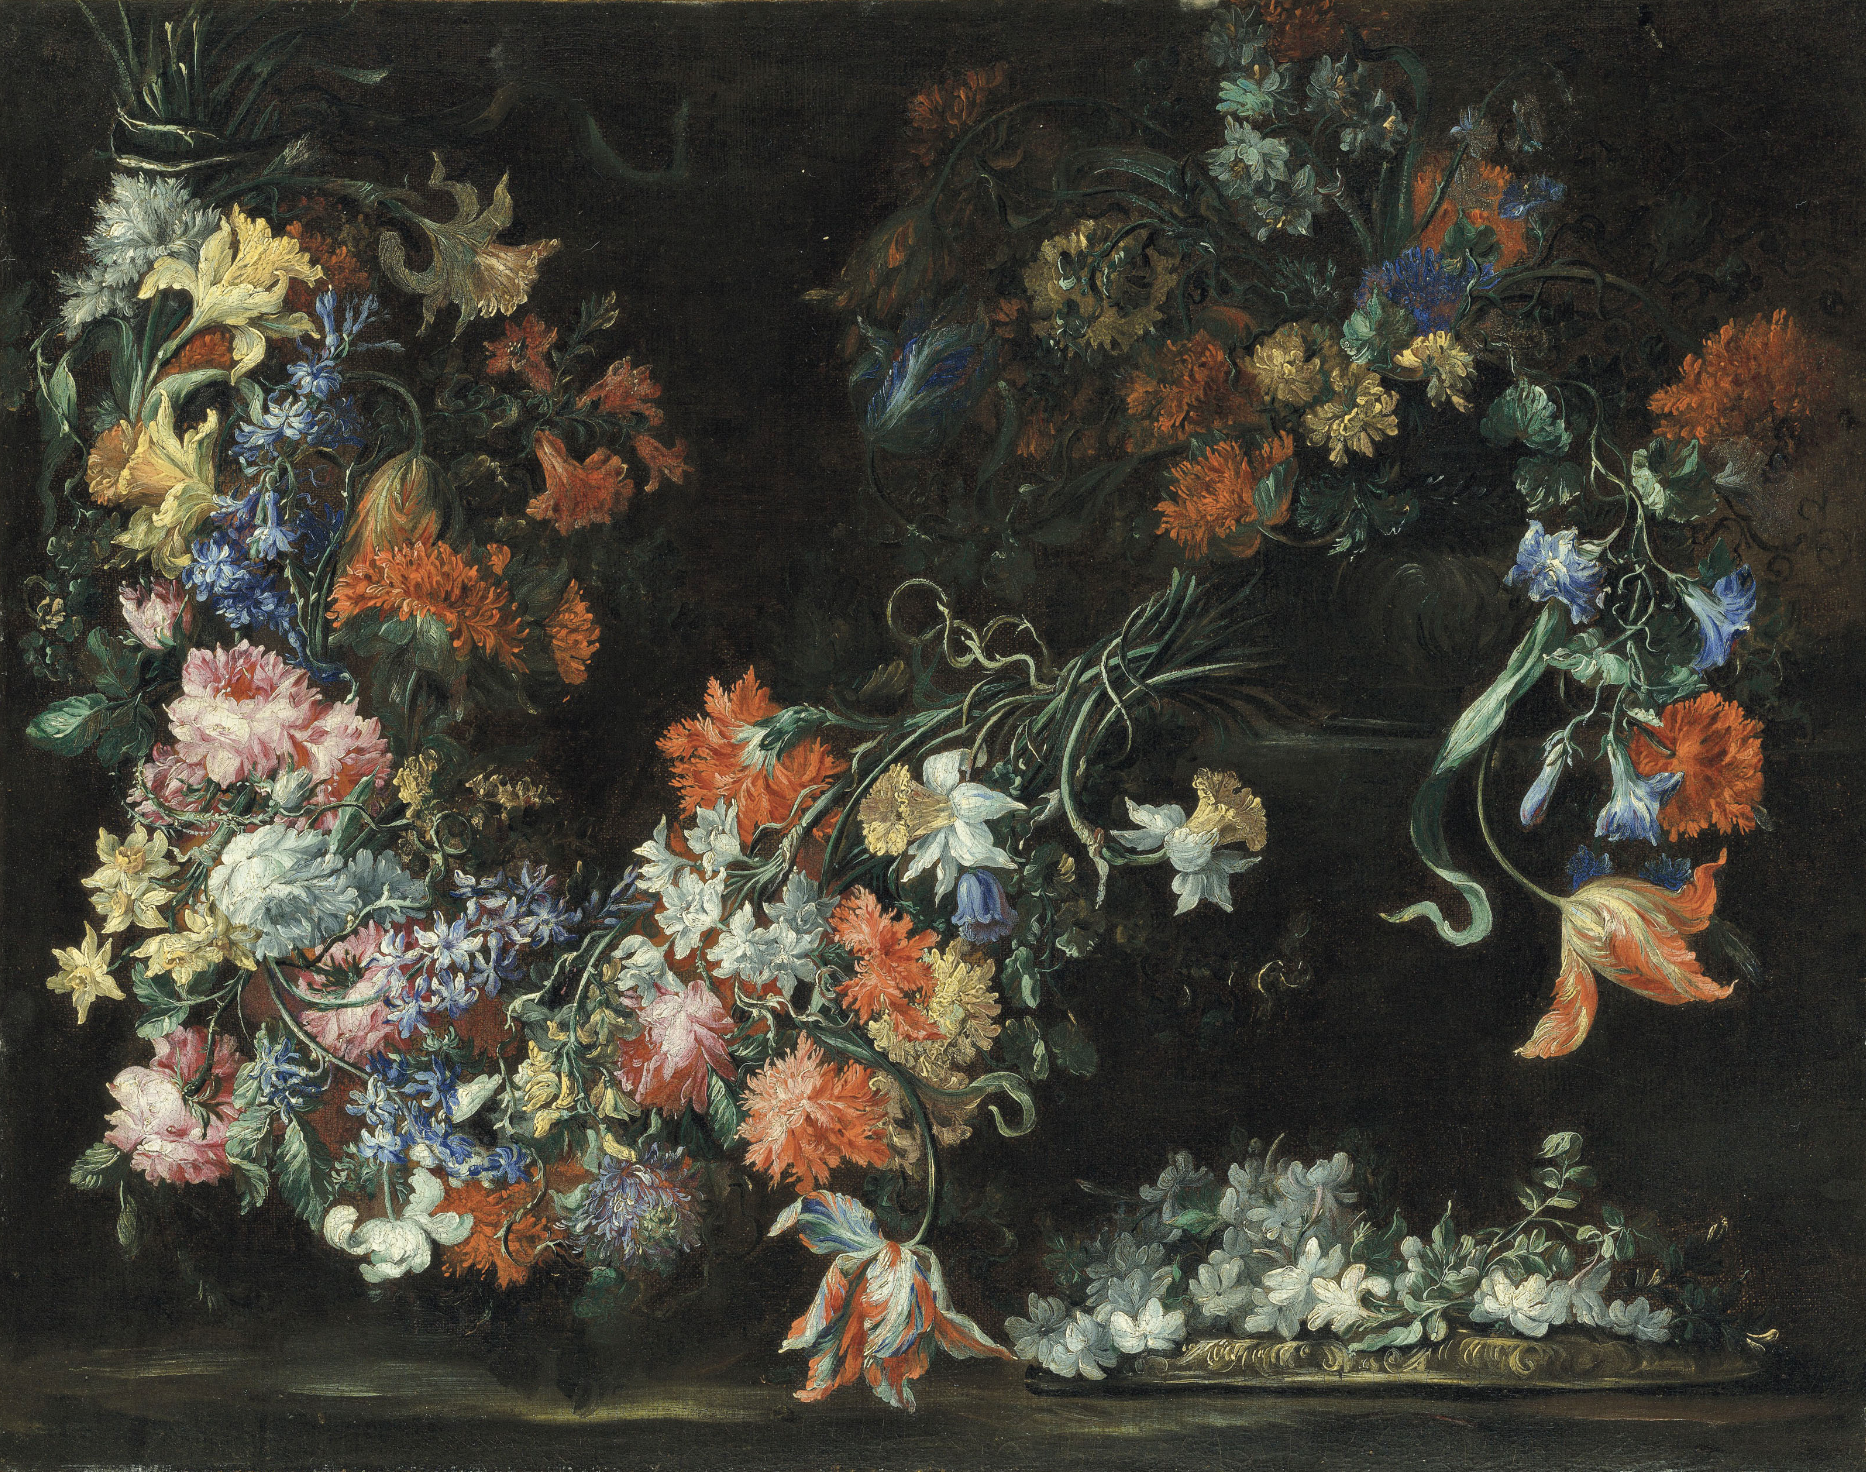 An elaborate floral still life with multiple arrangements of flowers in every color filling the entire composition. The background is dark and there are clusters of delicate, white flowers sitting on the table in the bottom right corner of the composition. 